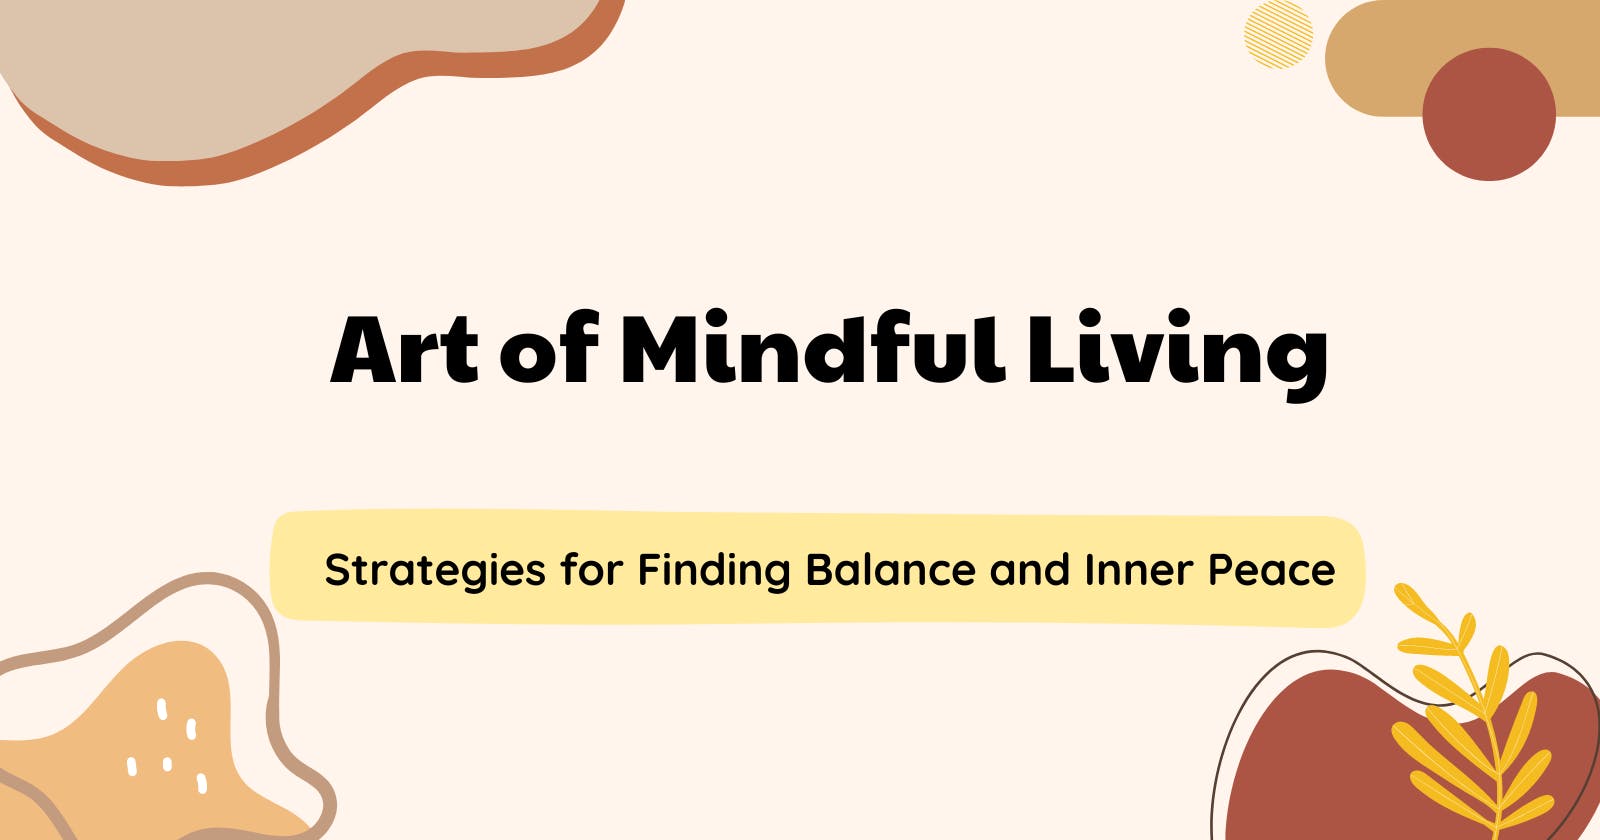 The Art of Mindful Living: Strategies for Finding Balance and Inner Peace